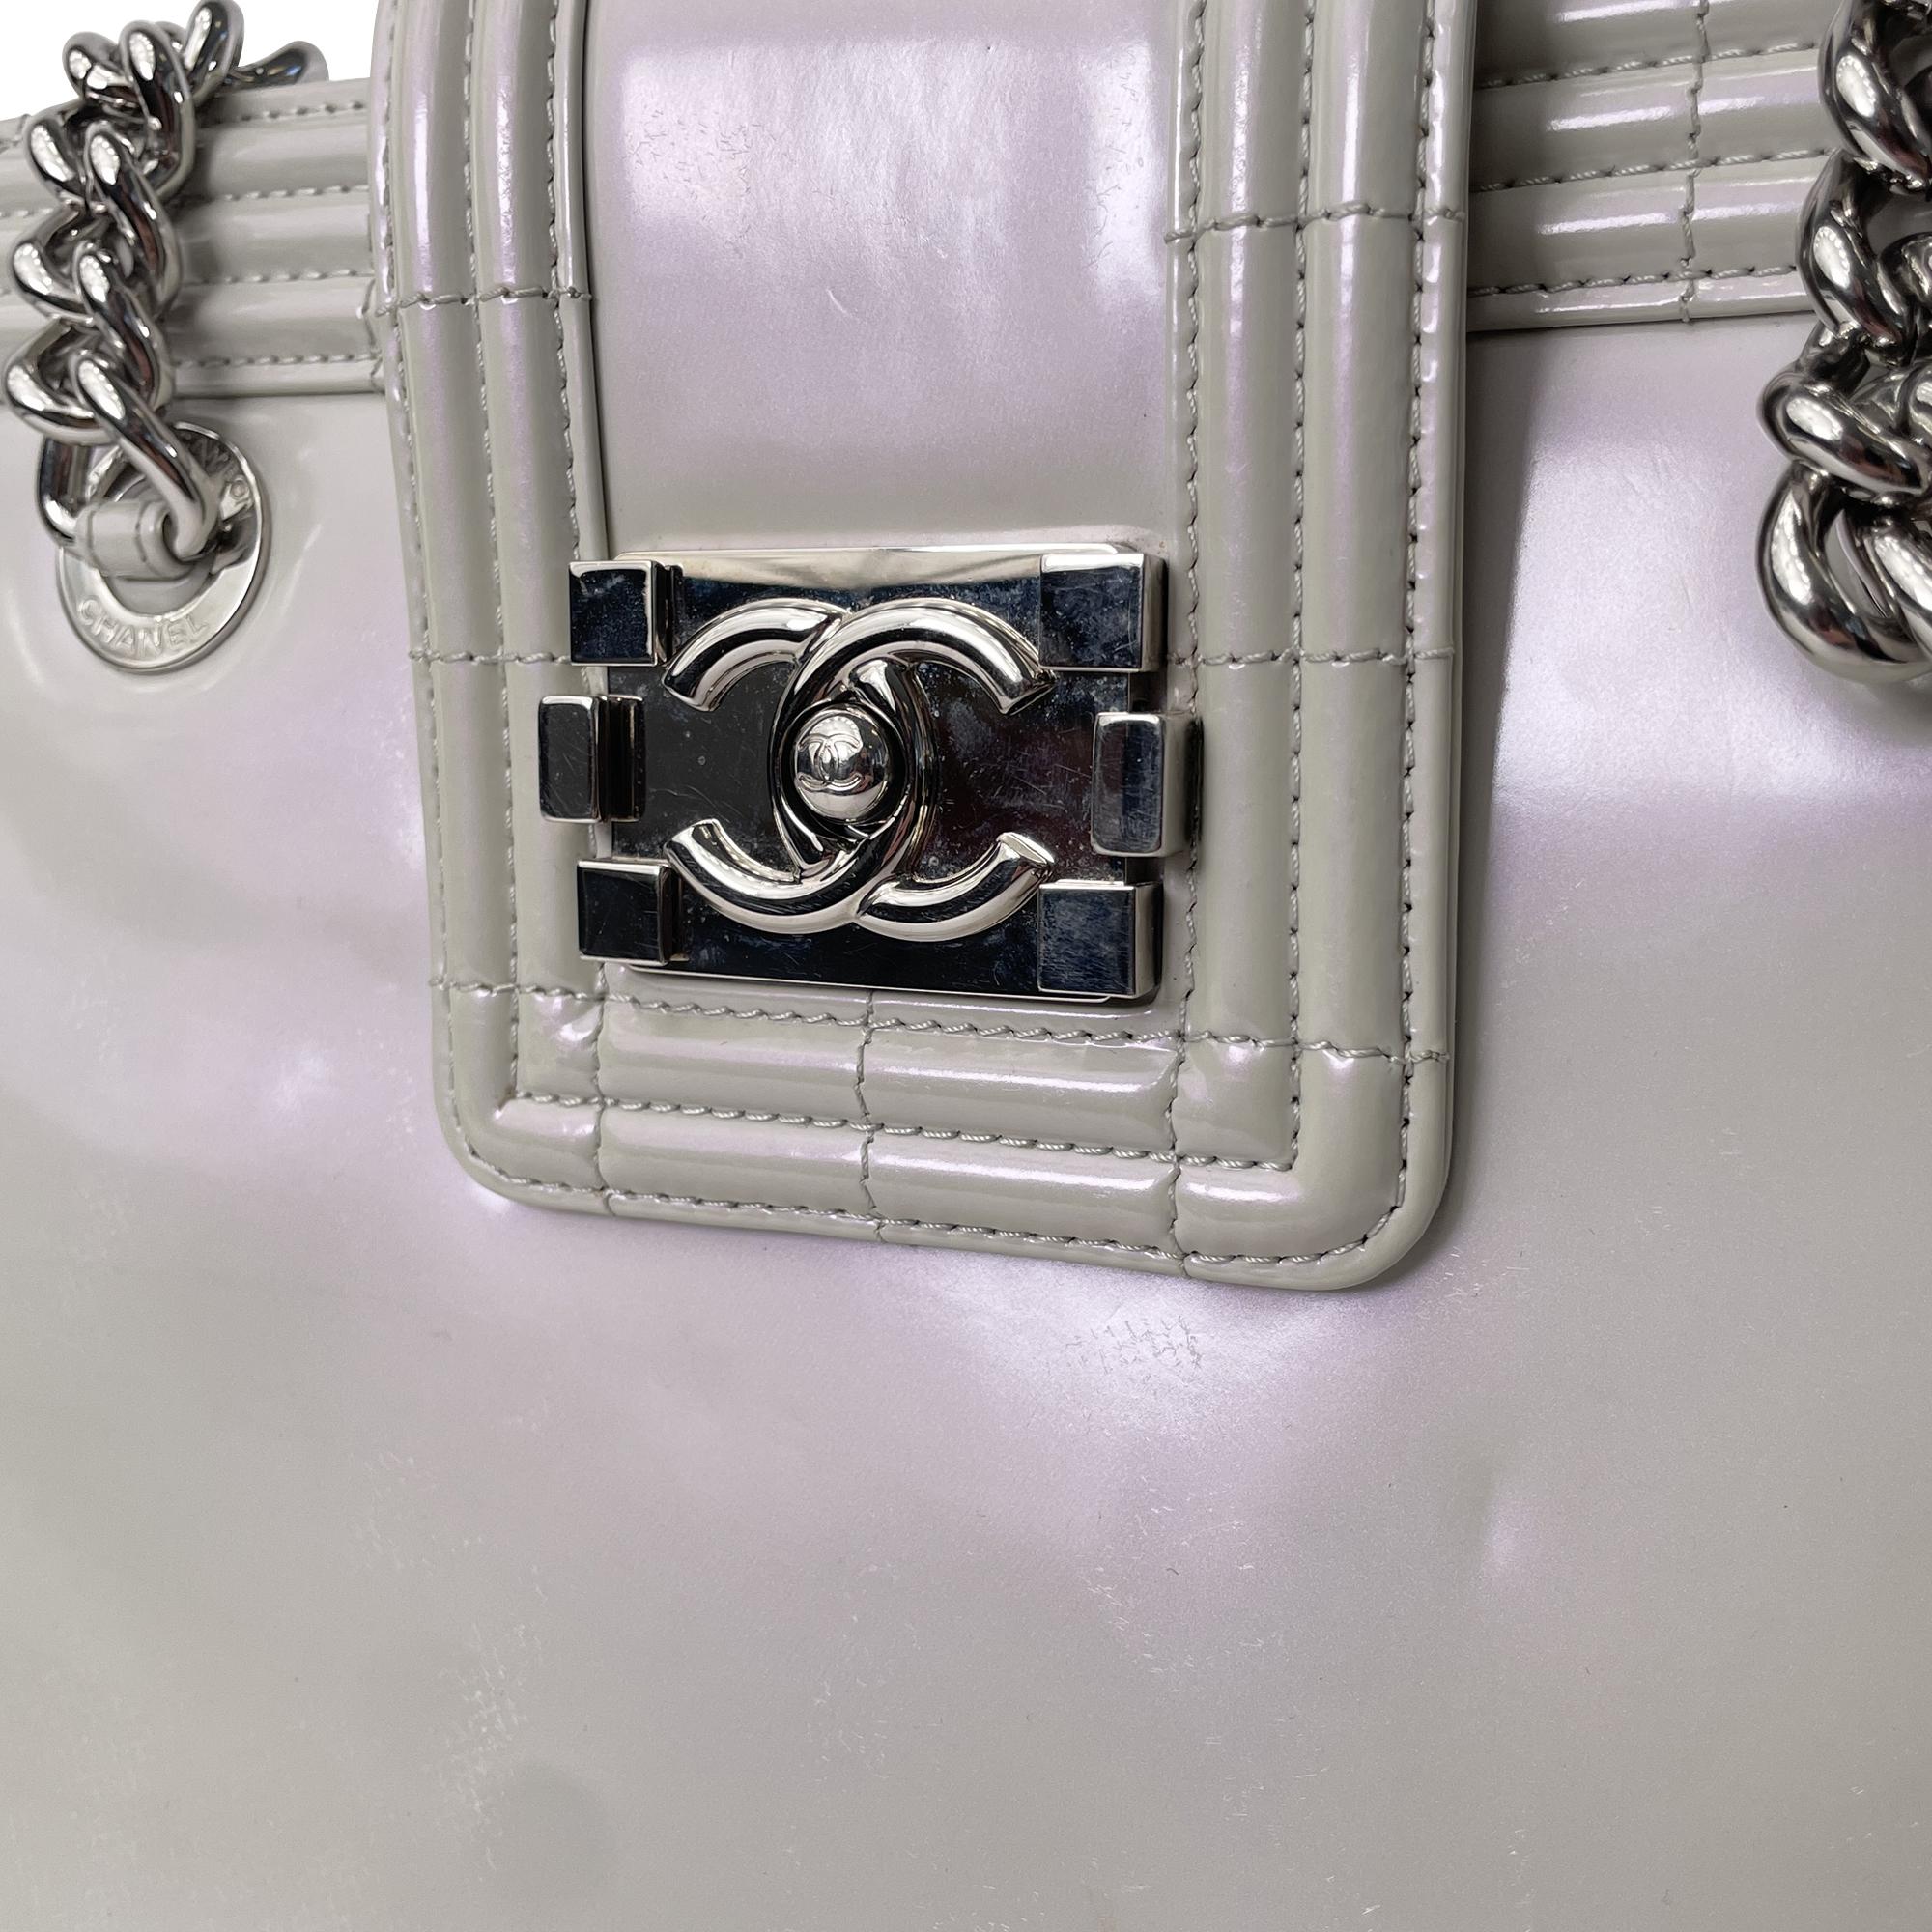 Chanel Grey Iridescent Patent Boy Reverso Shopping Tote